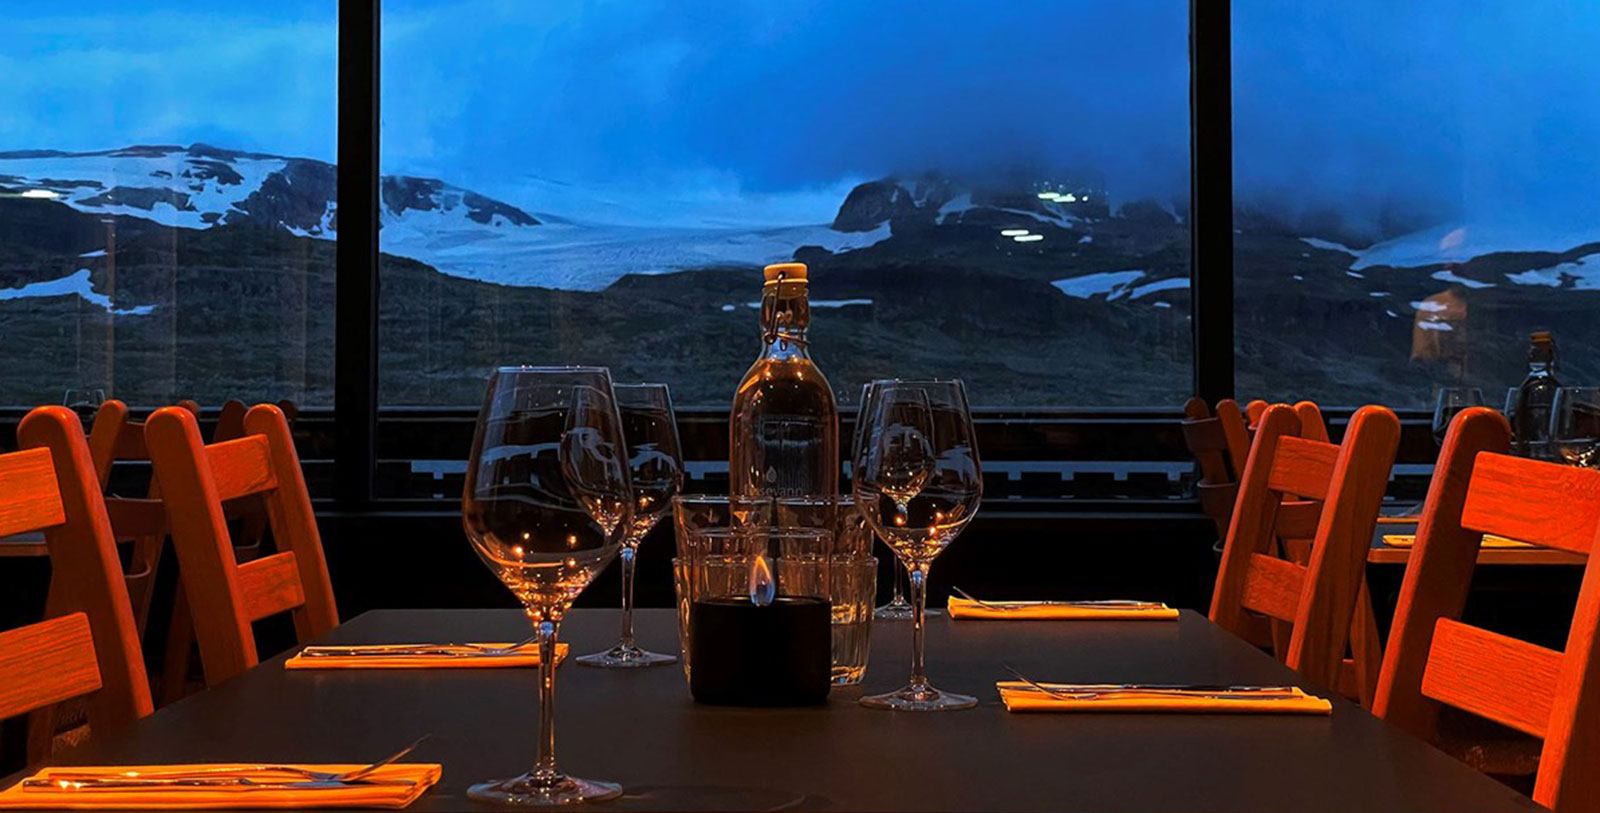 Image of Dining Room at Hotel Finse 1222, Norway, Dining